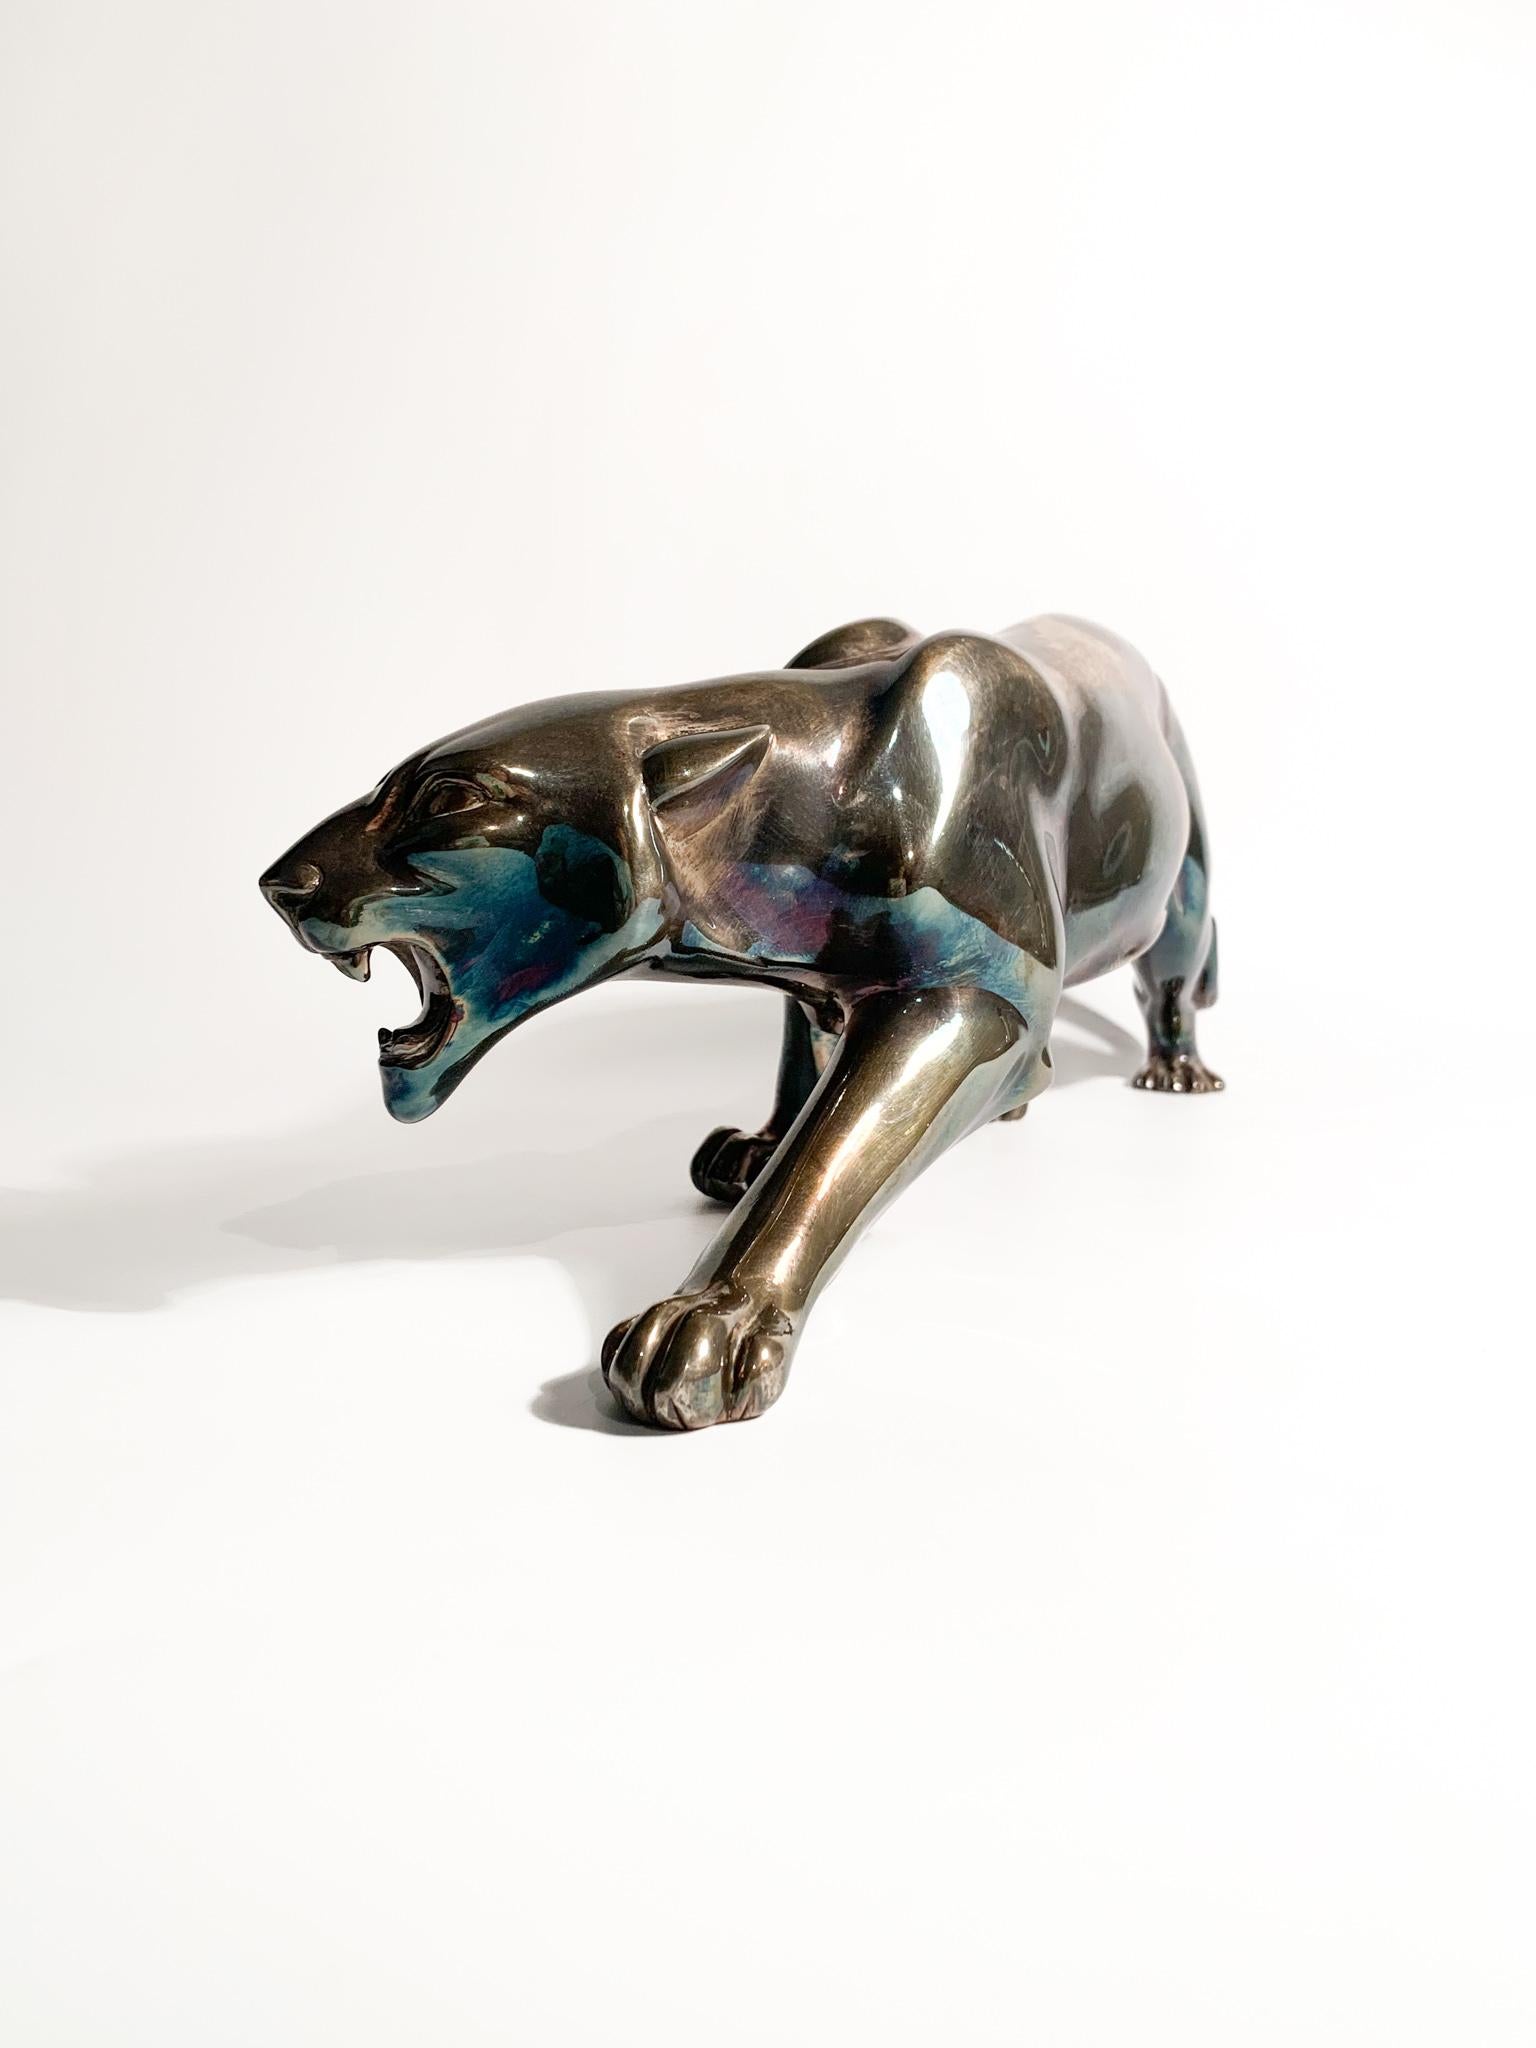 French Deco Sculpture of Feline with Silver Casting from the 1930s For Sale 2